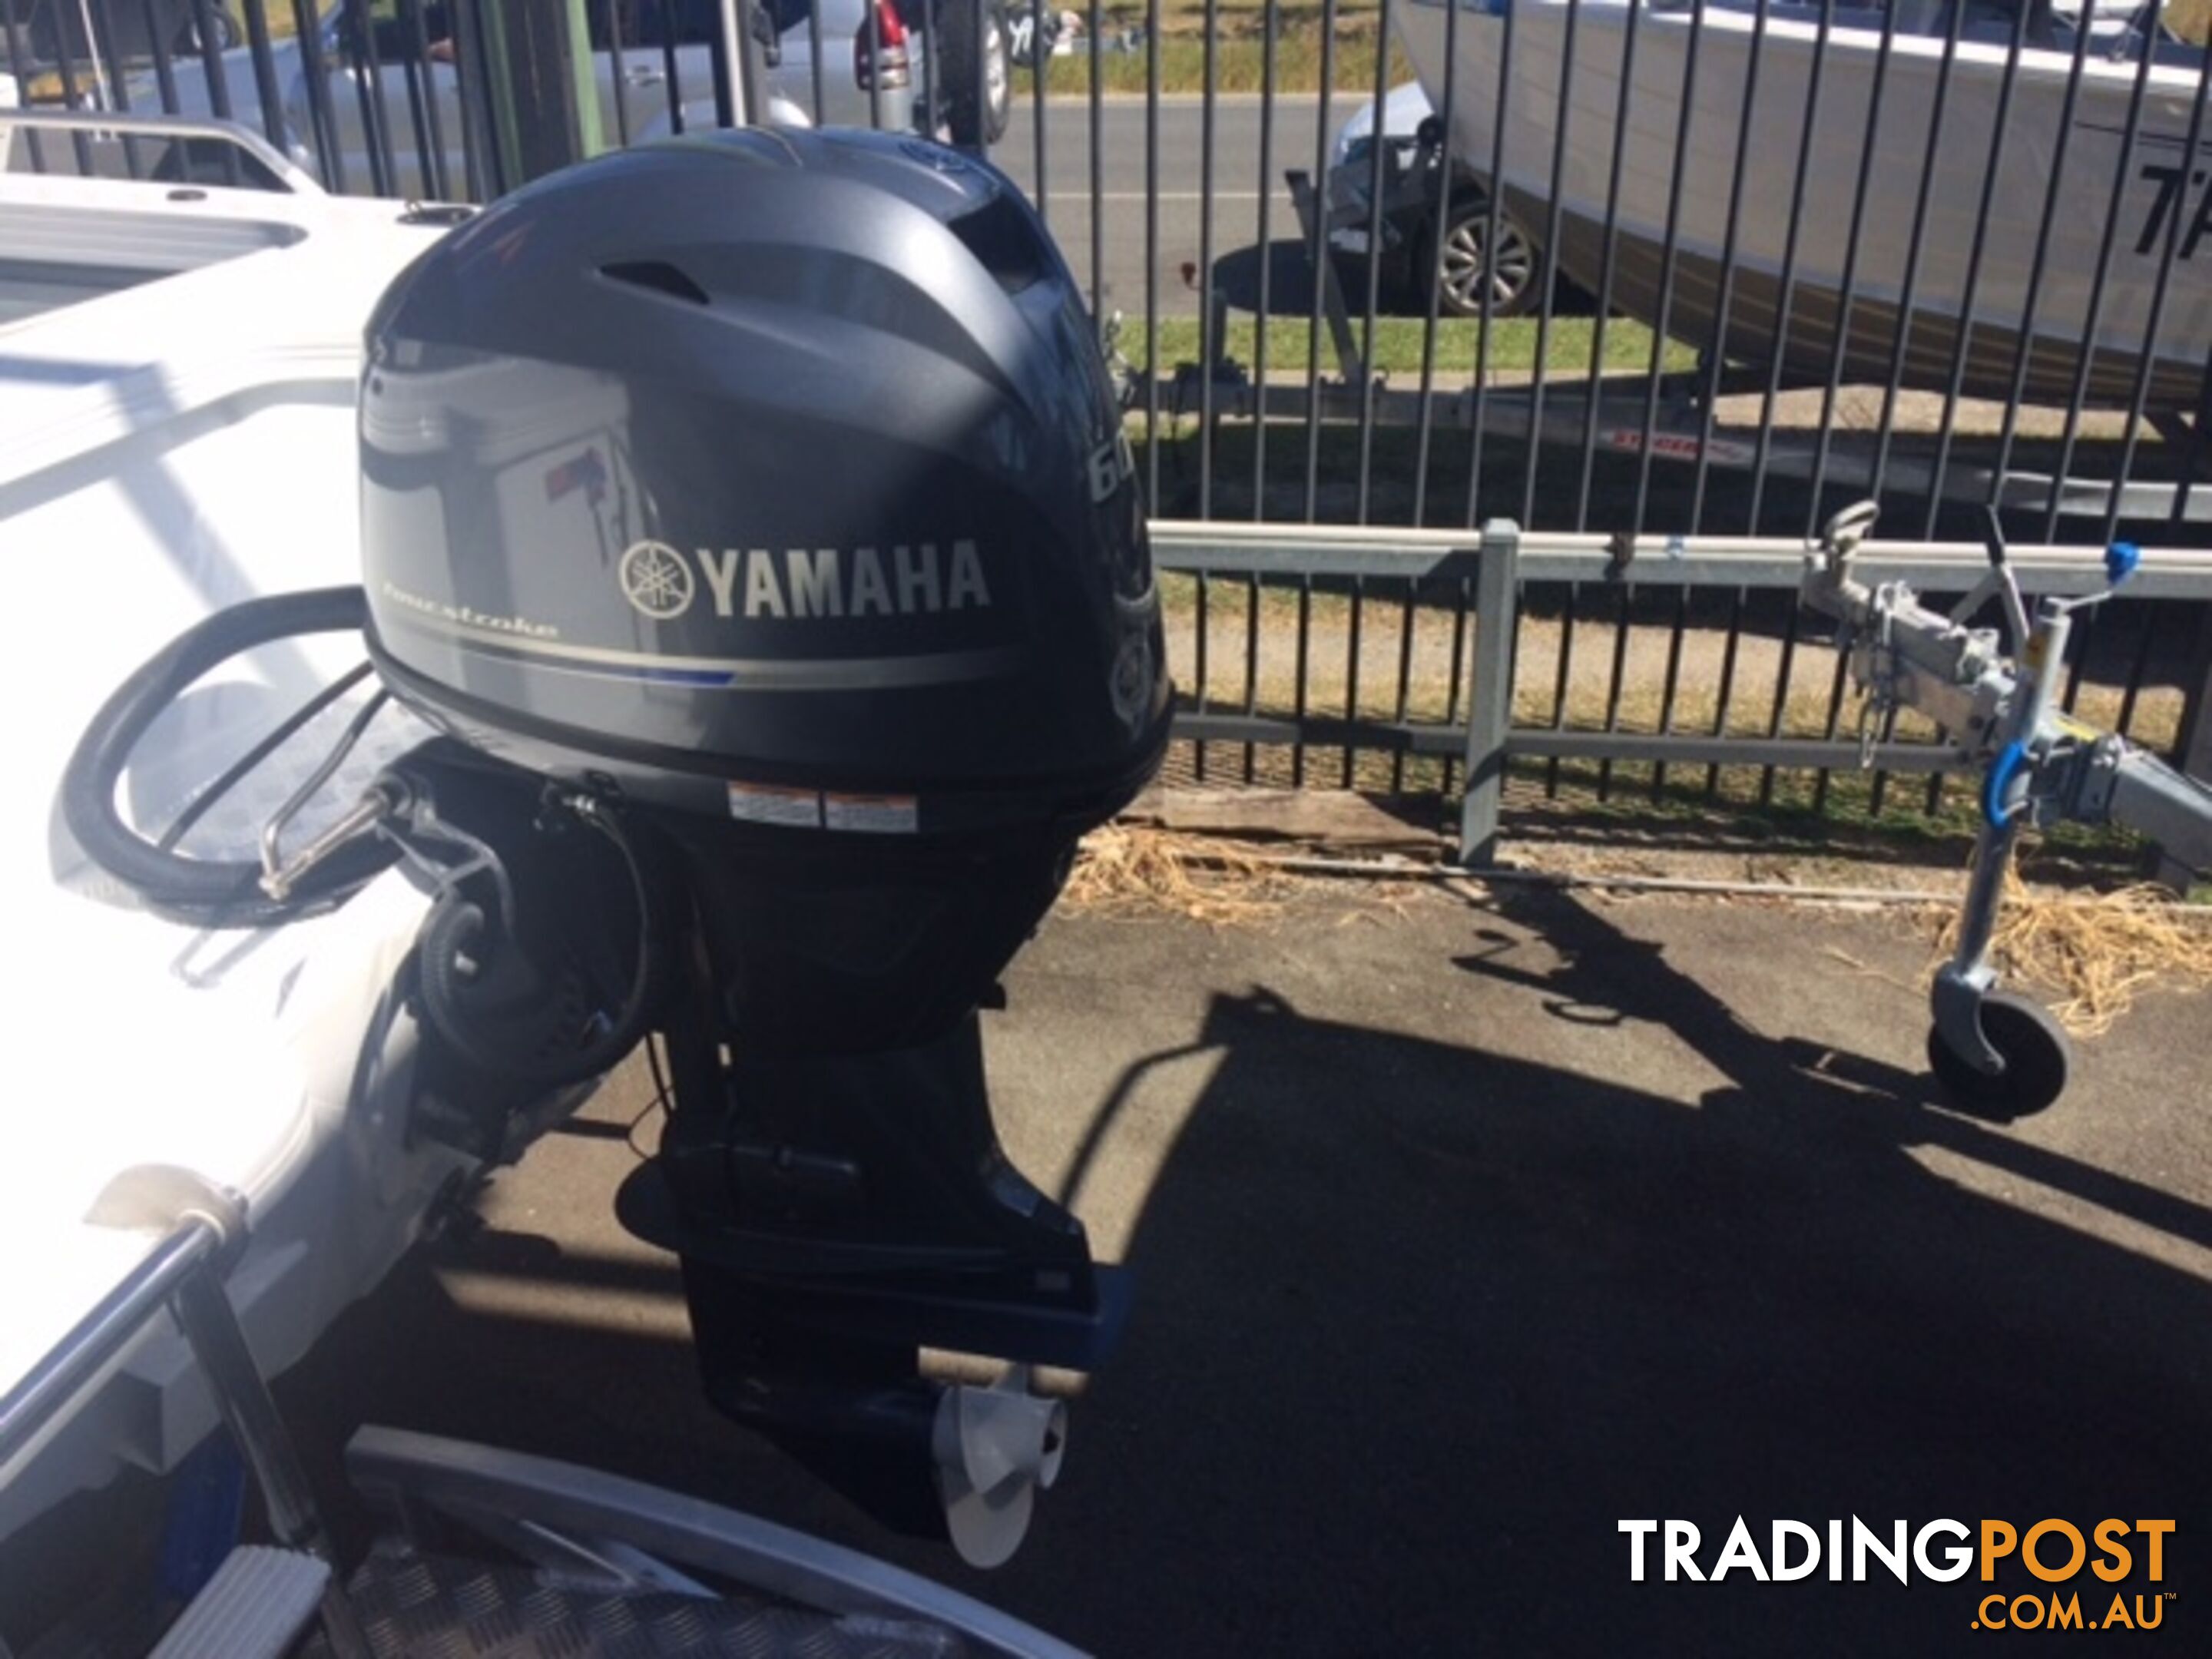 QUINTREX 450 TOP ENDER PACK 1 F60HP 4-STROKE YAMAHA FOR SALE